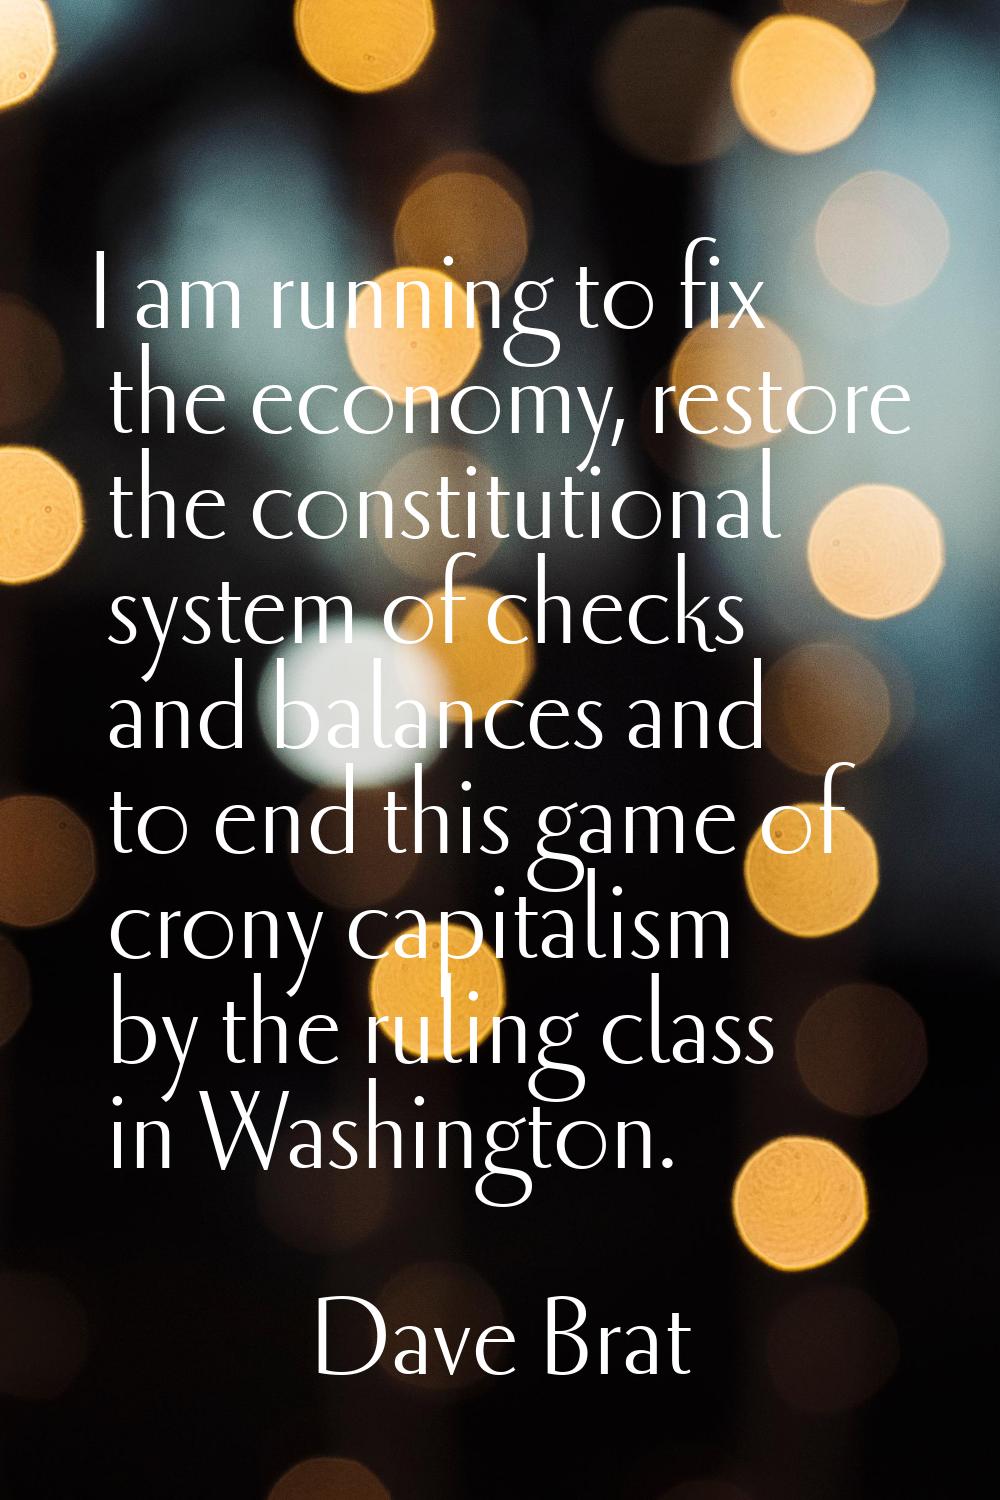 I am running to fix the economy, restore the constitutional system of checks and balances and to en